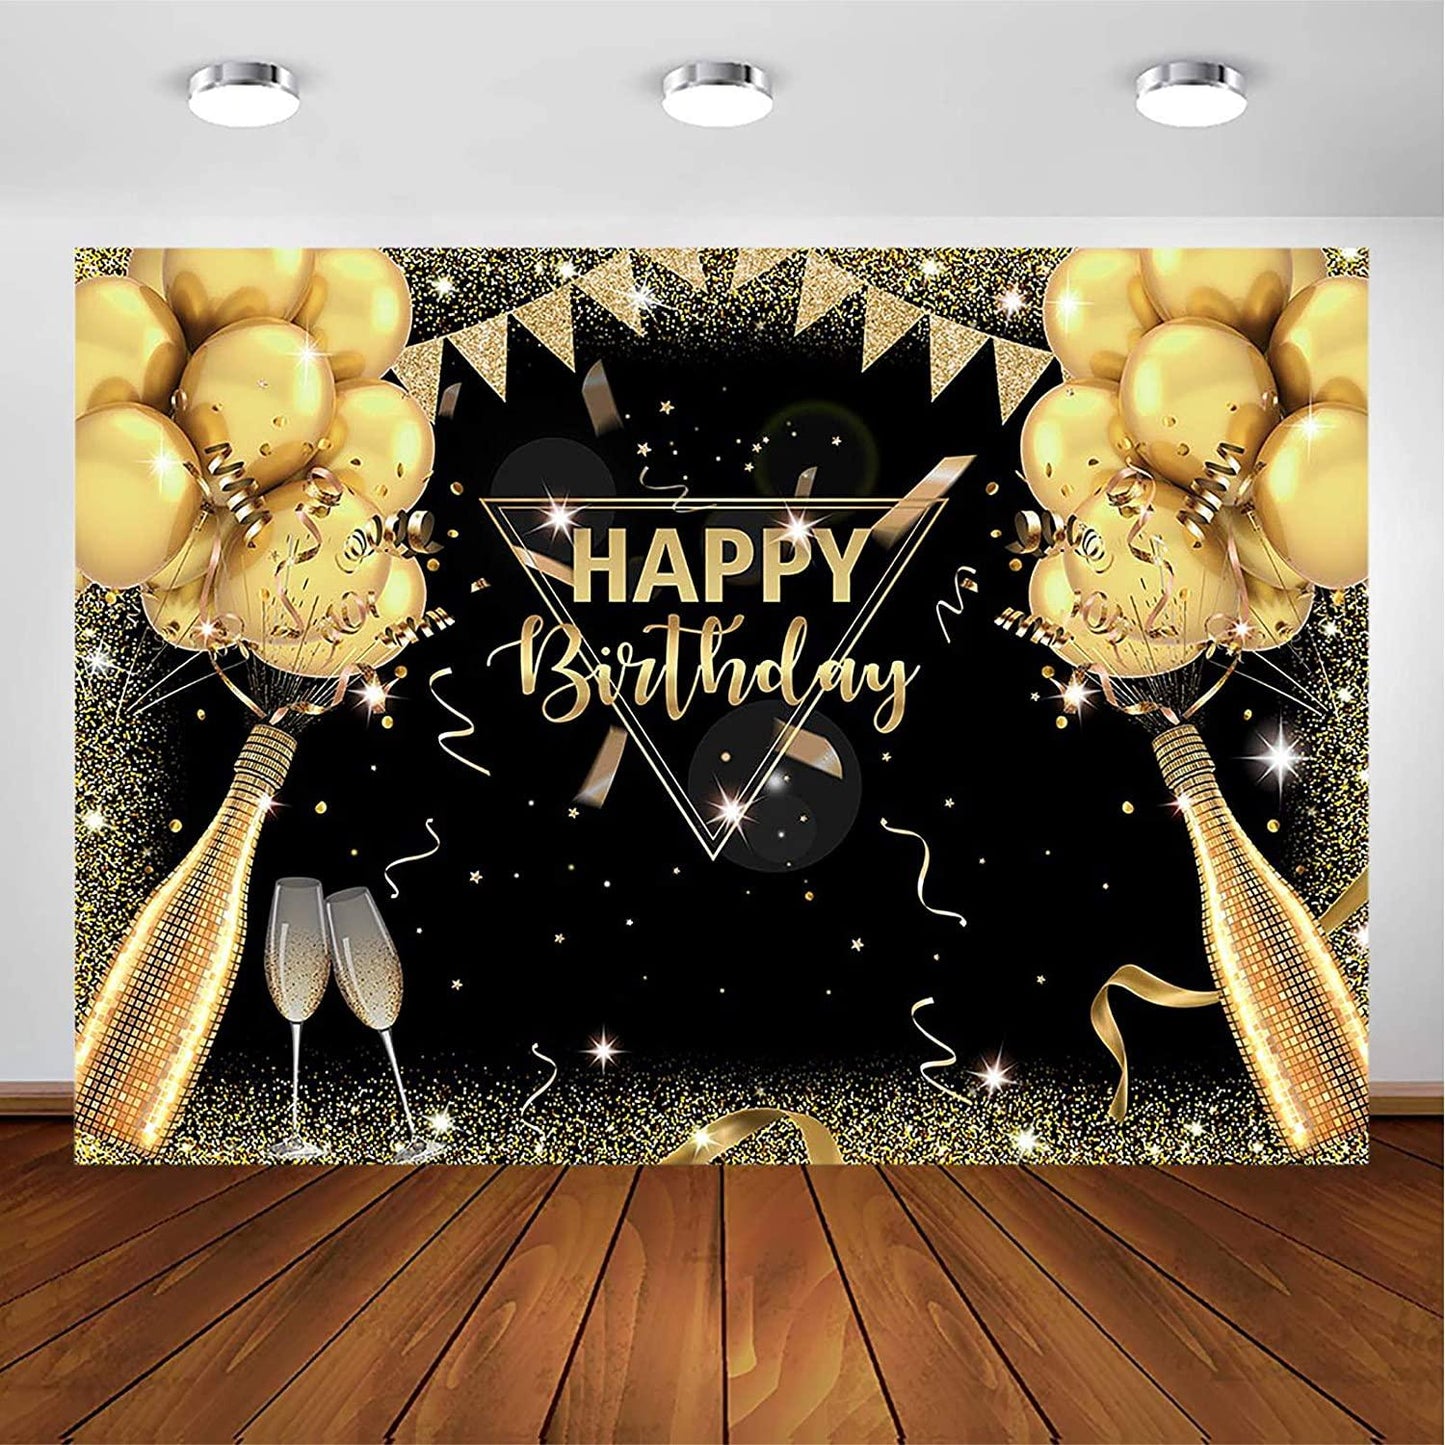 Black Gold Birthday Backdrop for Adult Men Woman Party Decorations Surprise Balloon - If you say i do